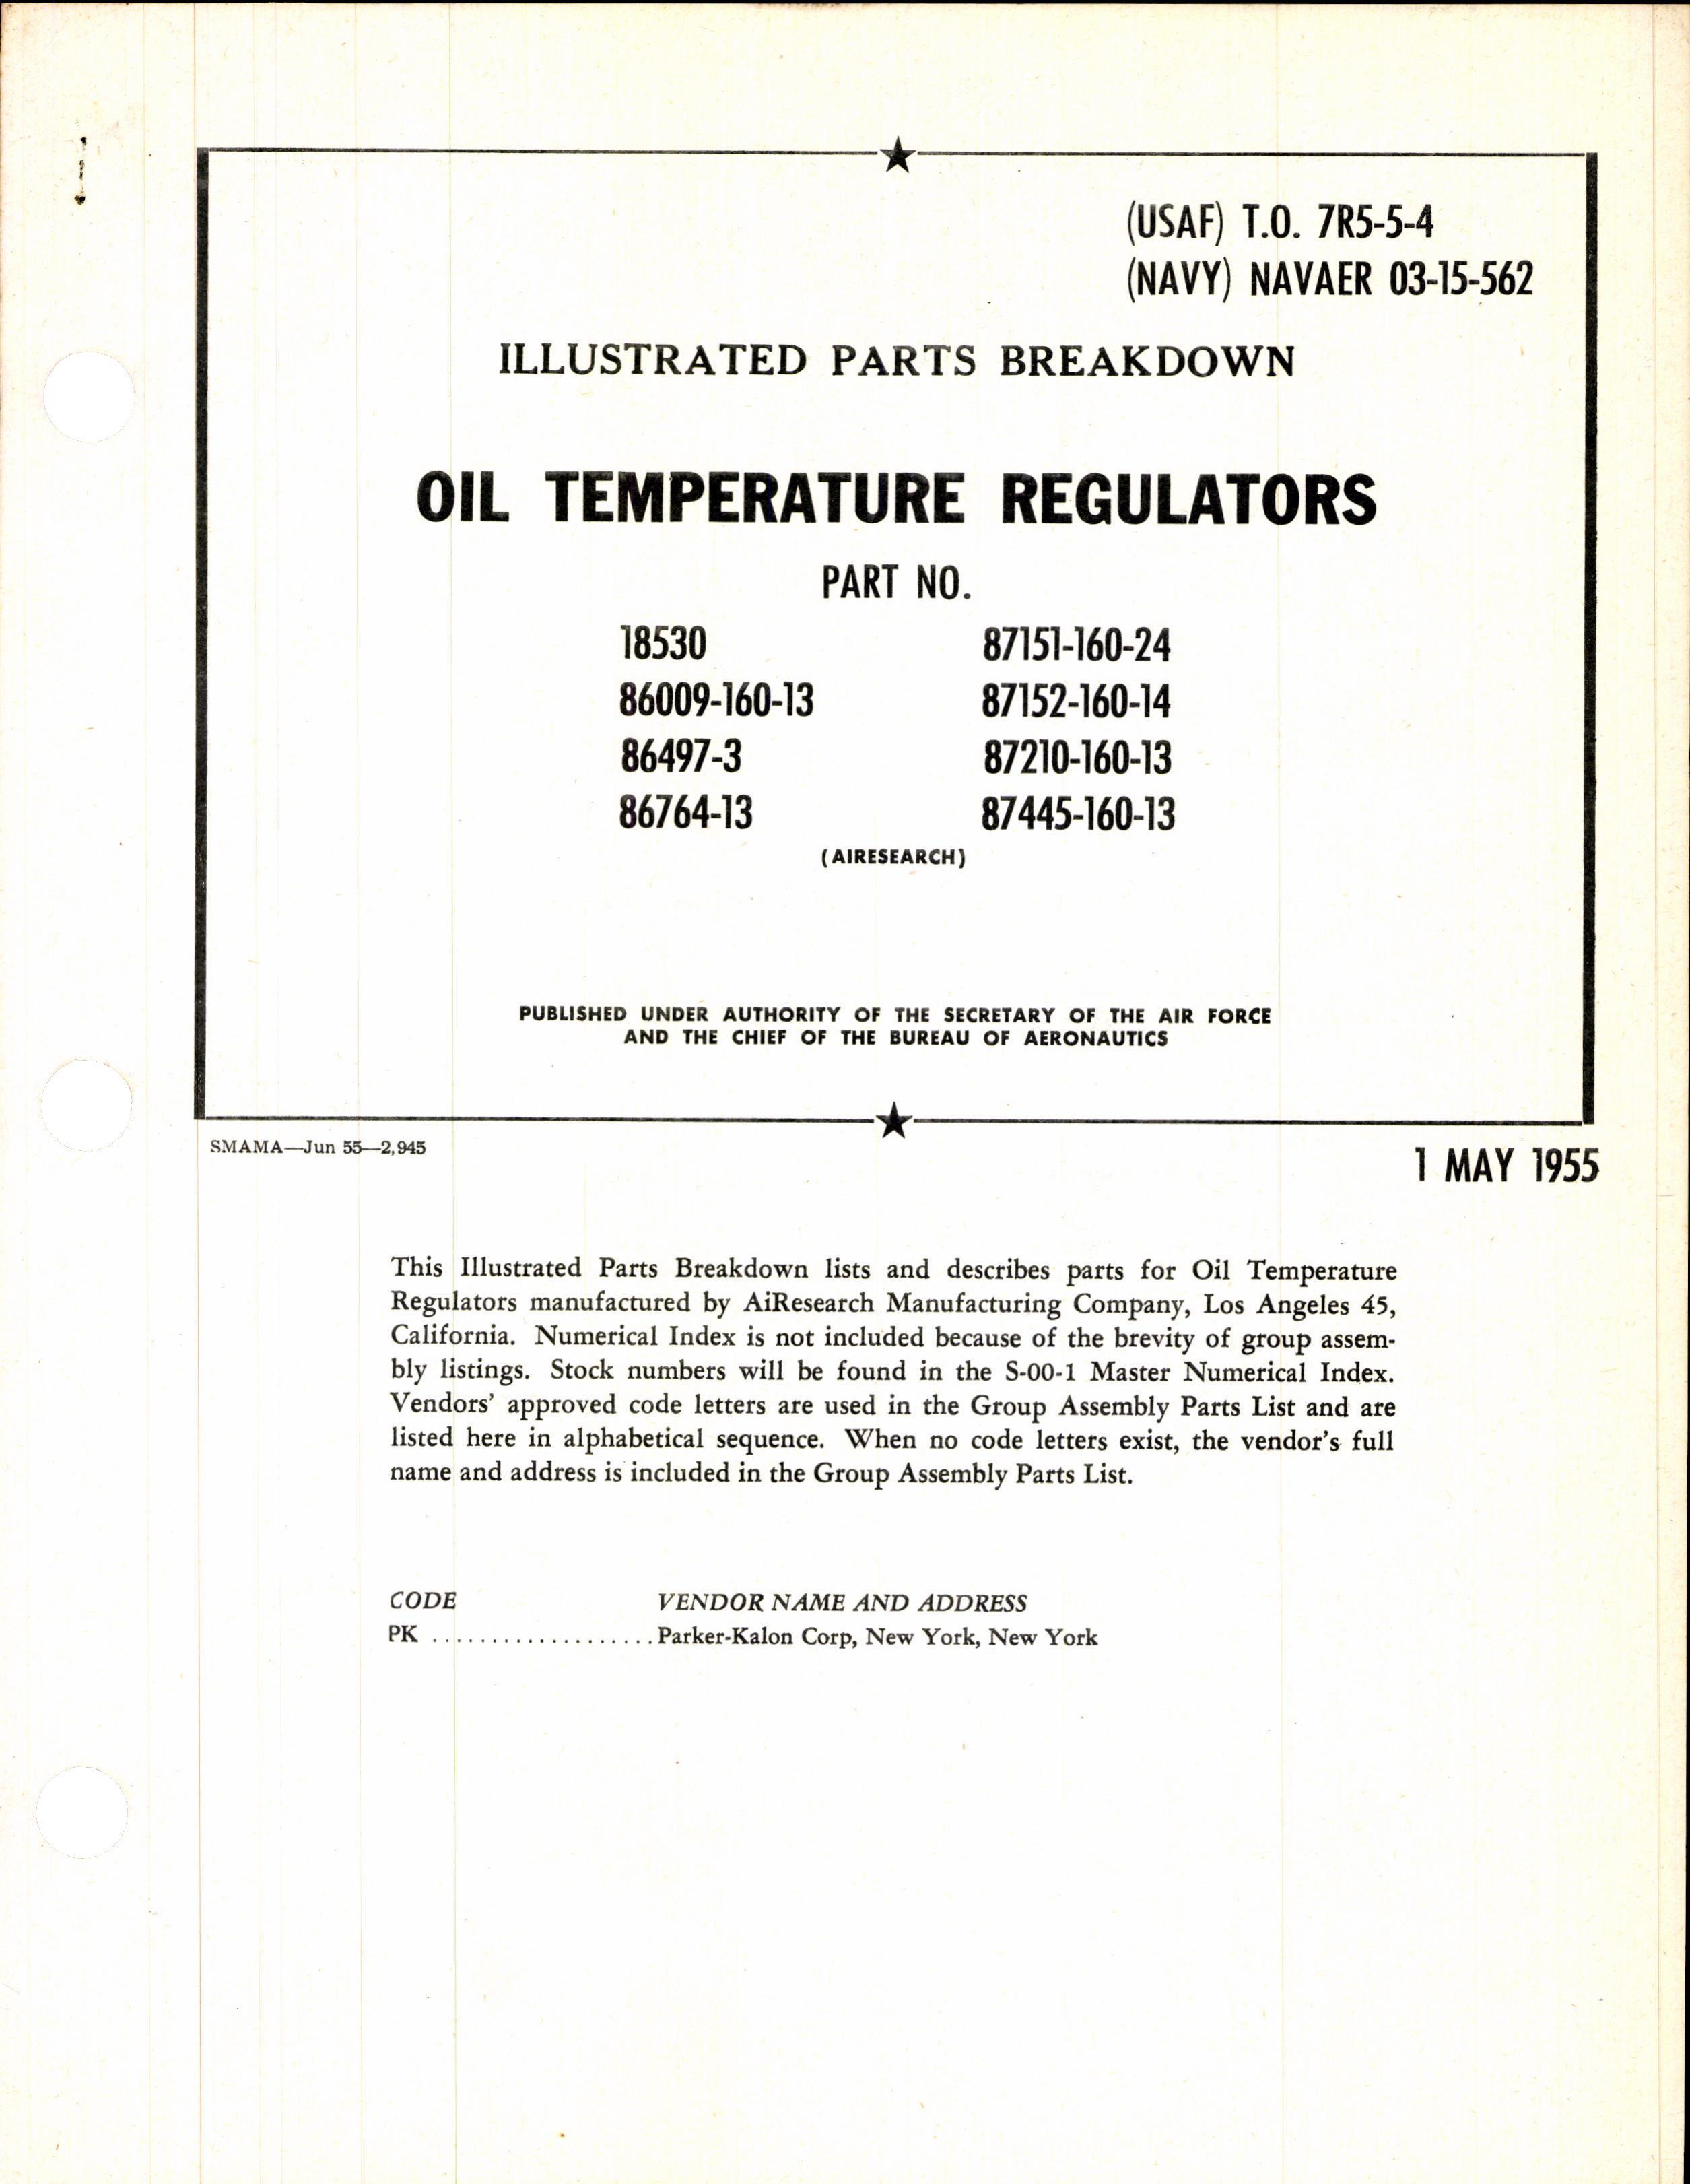 Sample page 1 from AirCorps Library document: Illustrated Parts Breakdown for Airesearch Oil Temperature Regulators